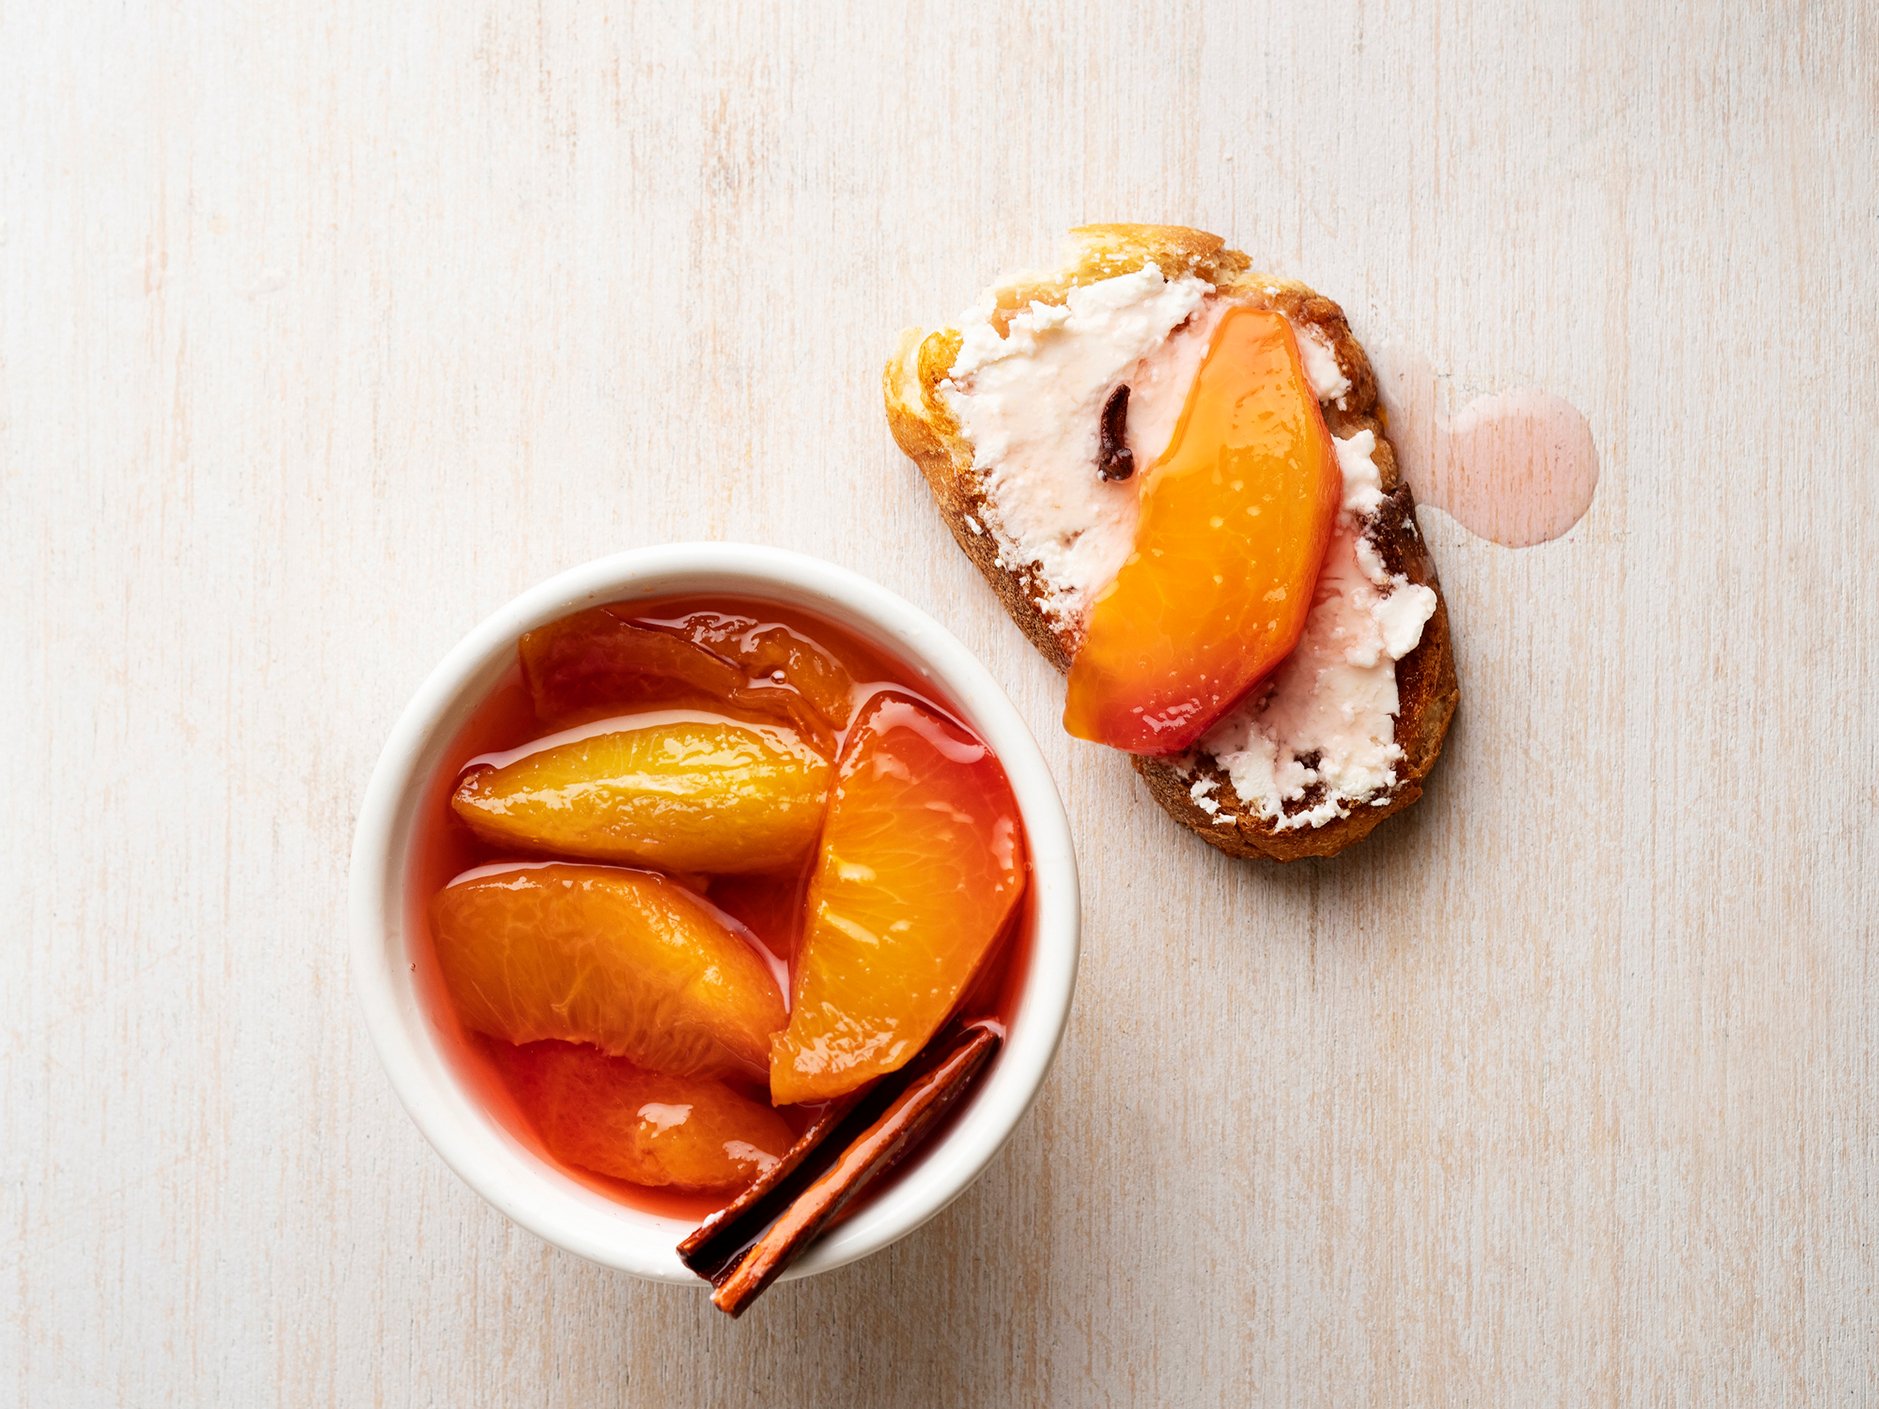 Pair your peach preserves with some cream cheese for a delicious snack. (iStock Photo)